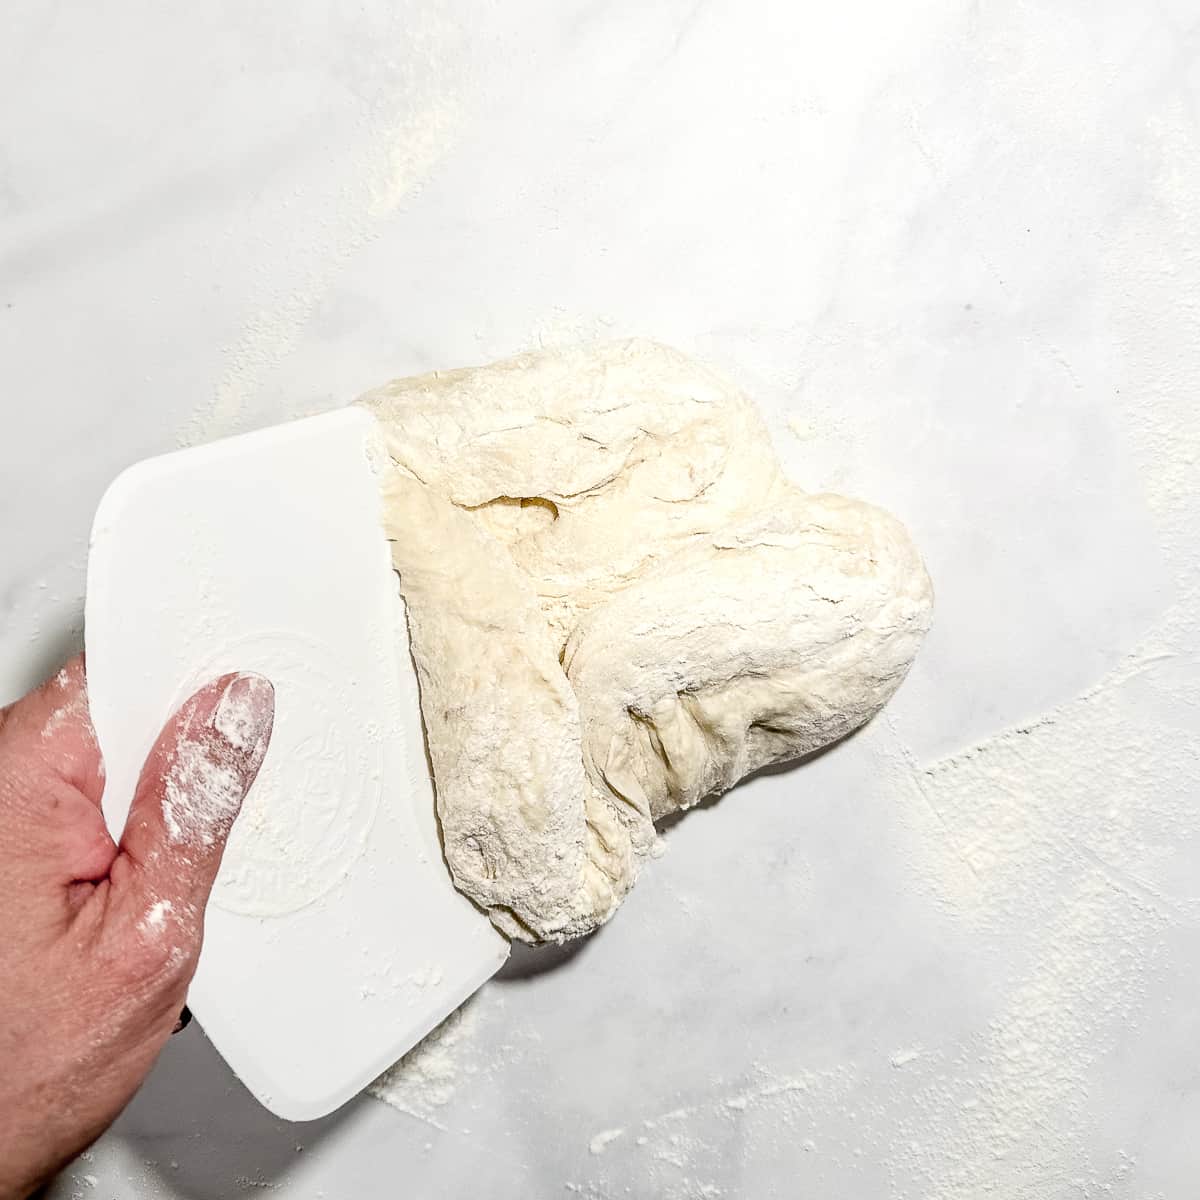 folding edges of dough over themselves to form a large dough ball.